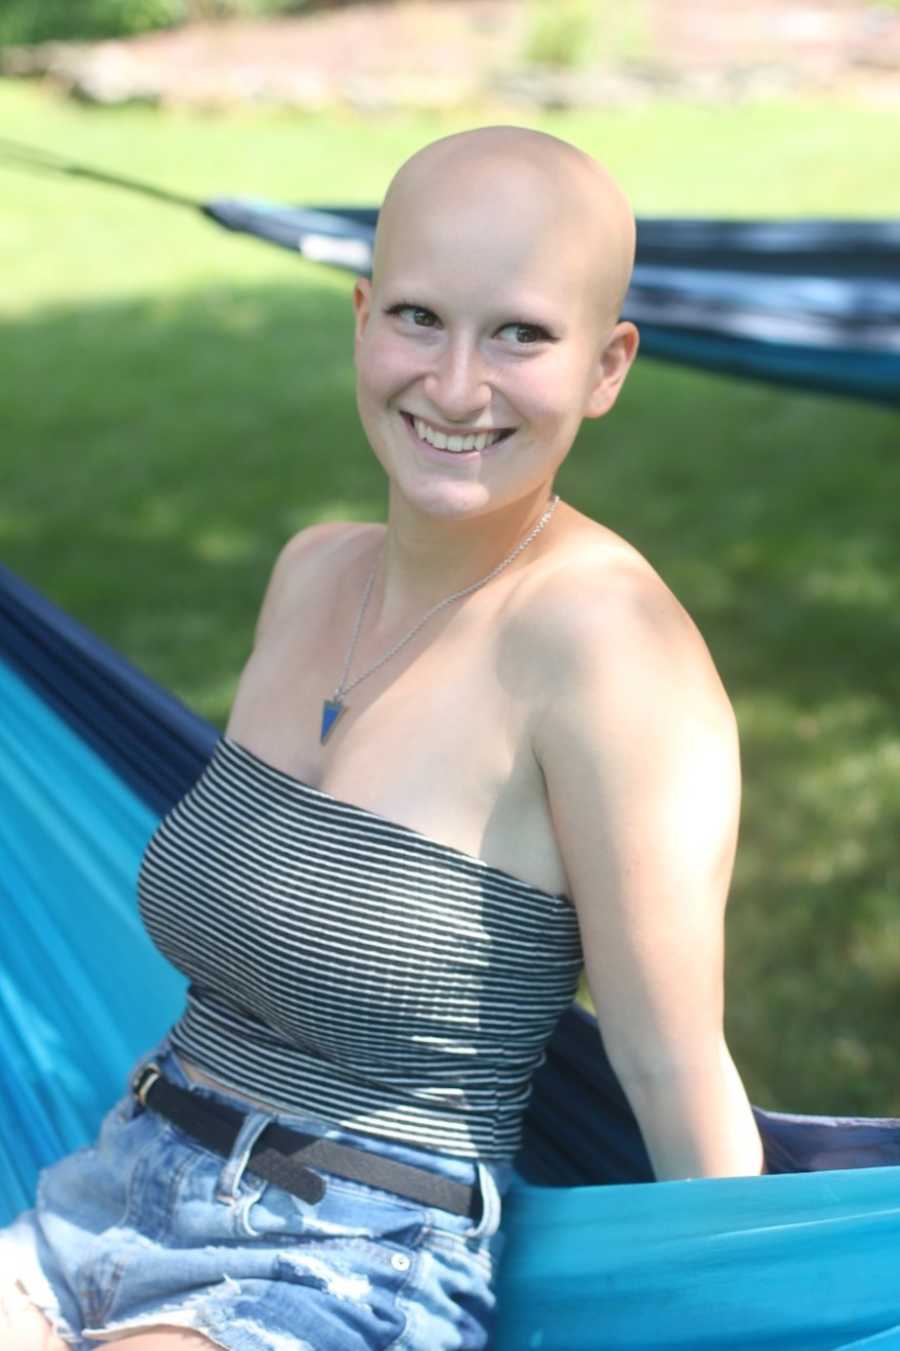 Woman with alopecia smiling in the sun